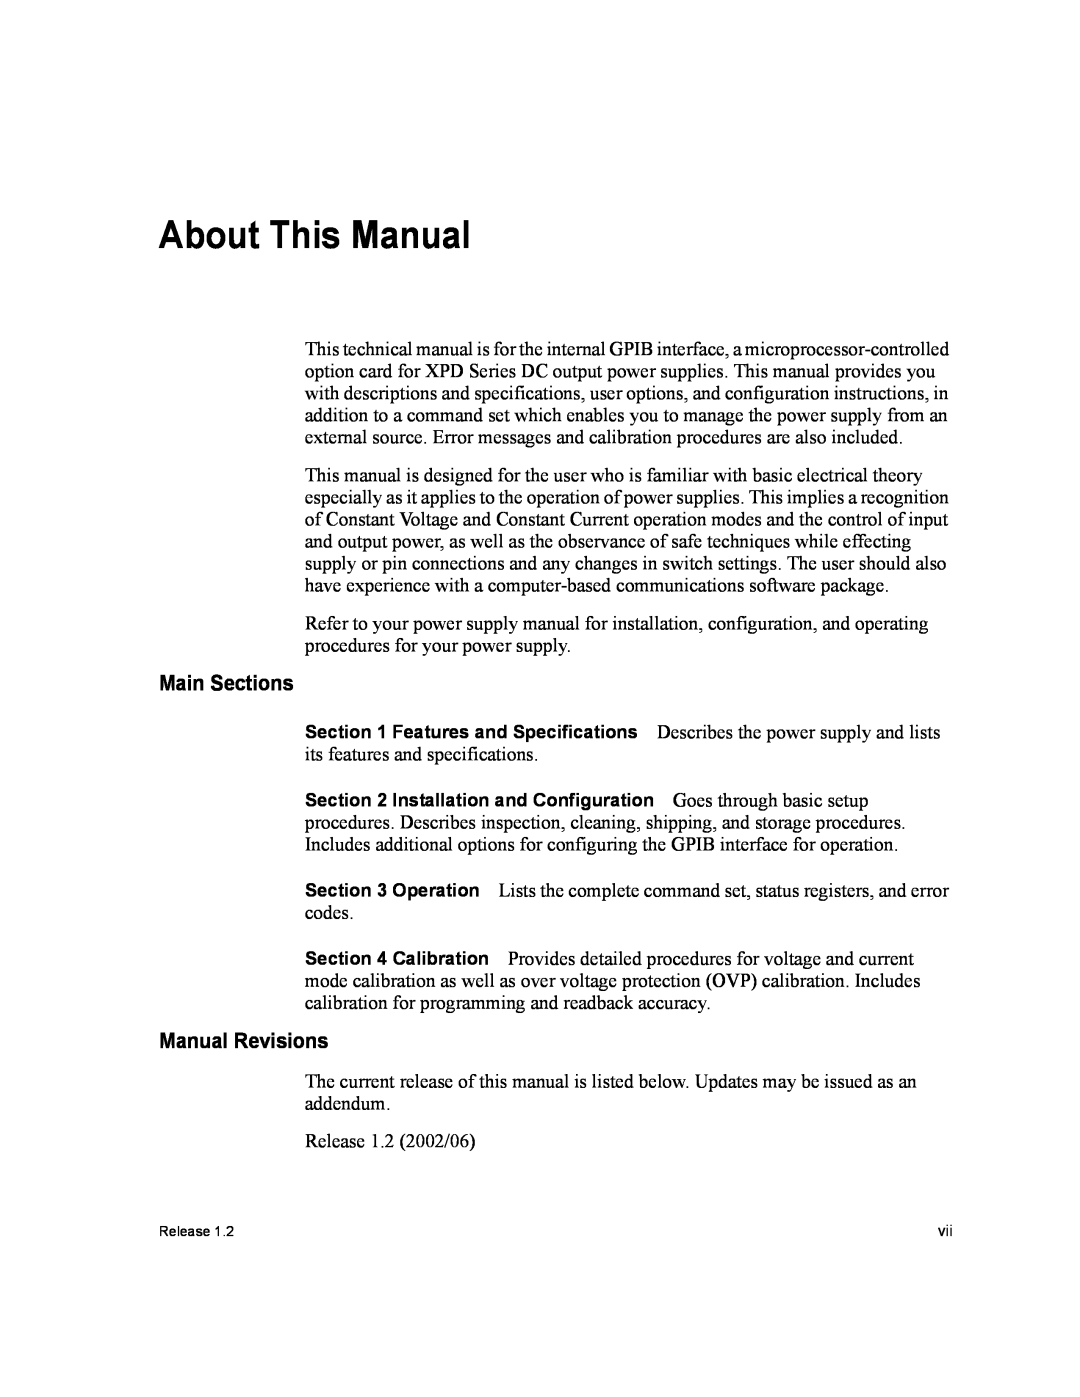 Xantrex Technology GPIB-XPD manual Main Sections, Manual Revisions, About This Manual, Describes the power supply and lists 